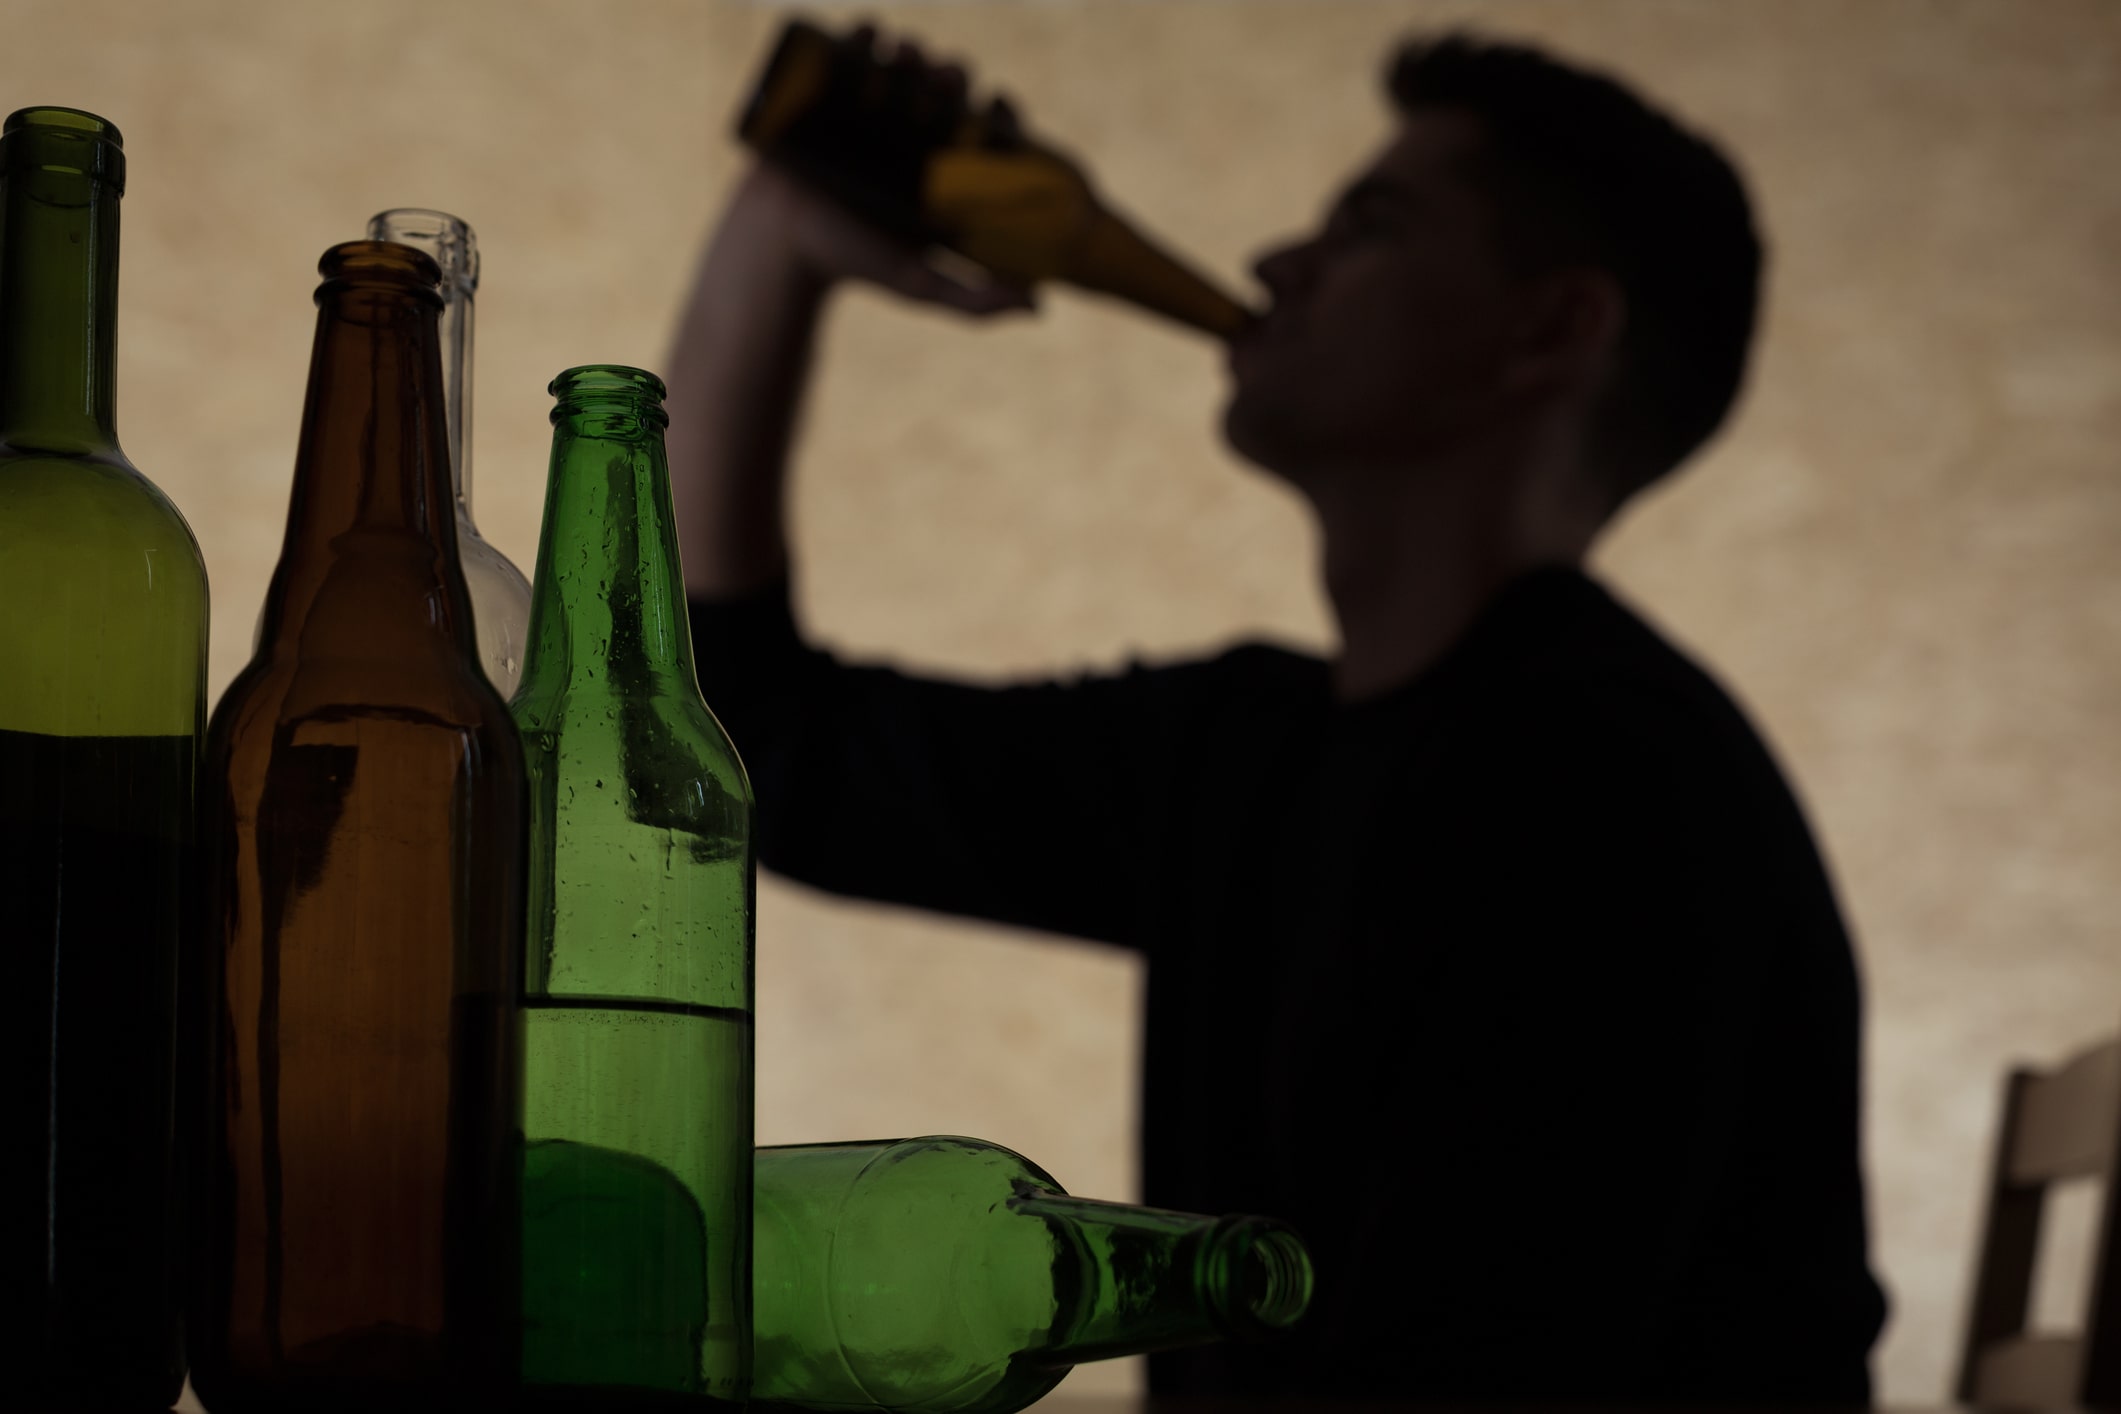 man drinking too much alcohol with several empty bottles in foreground